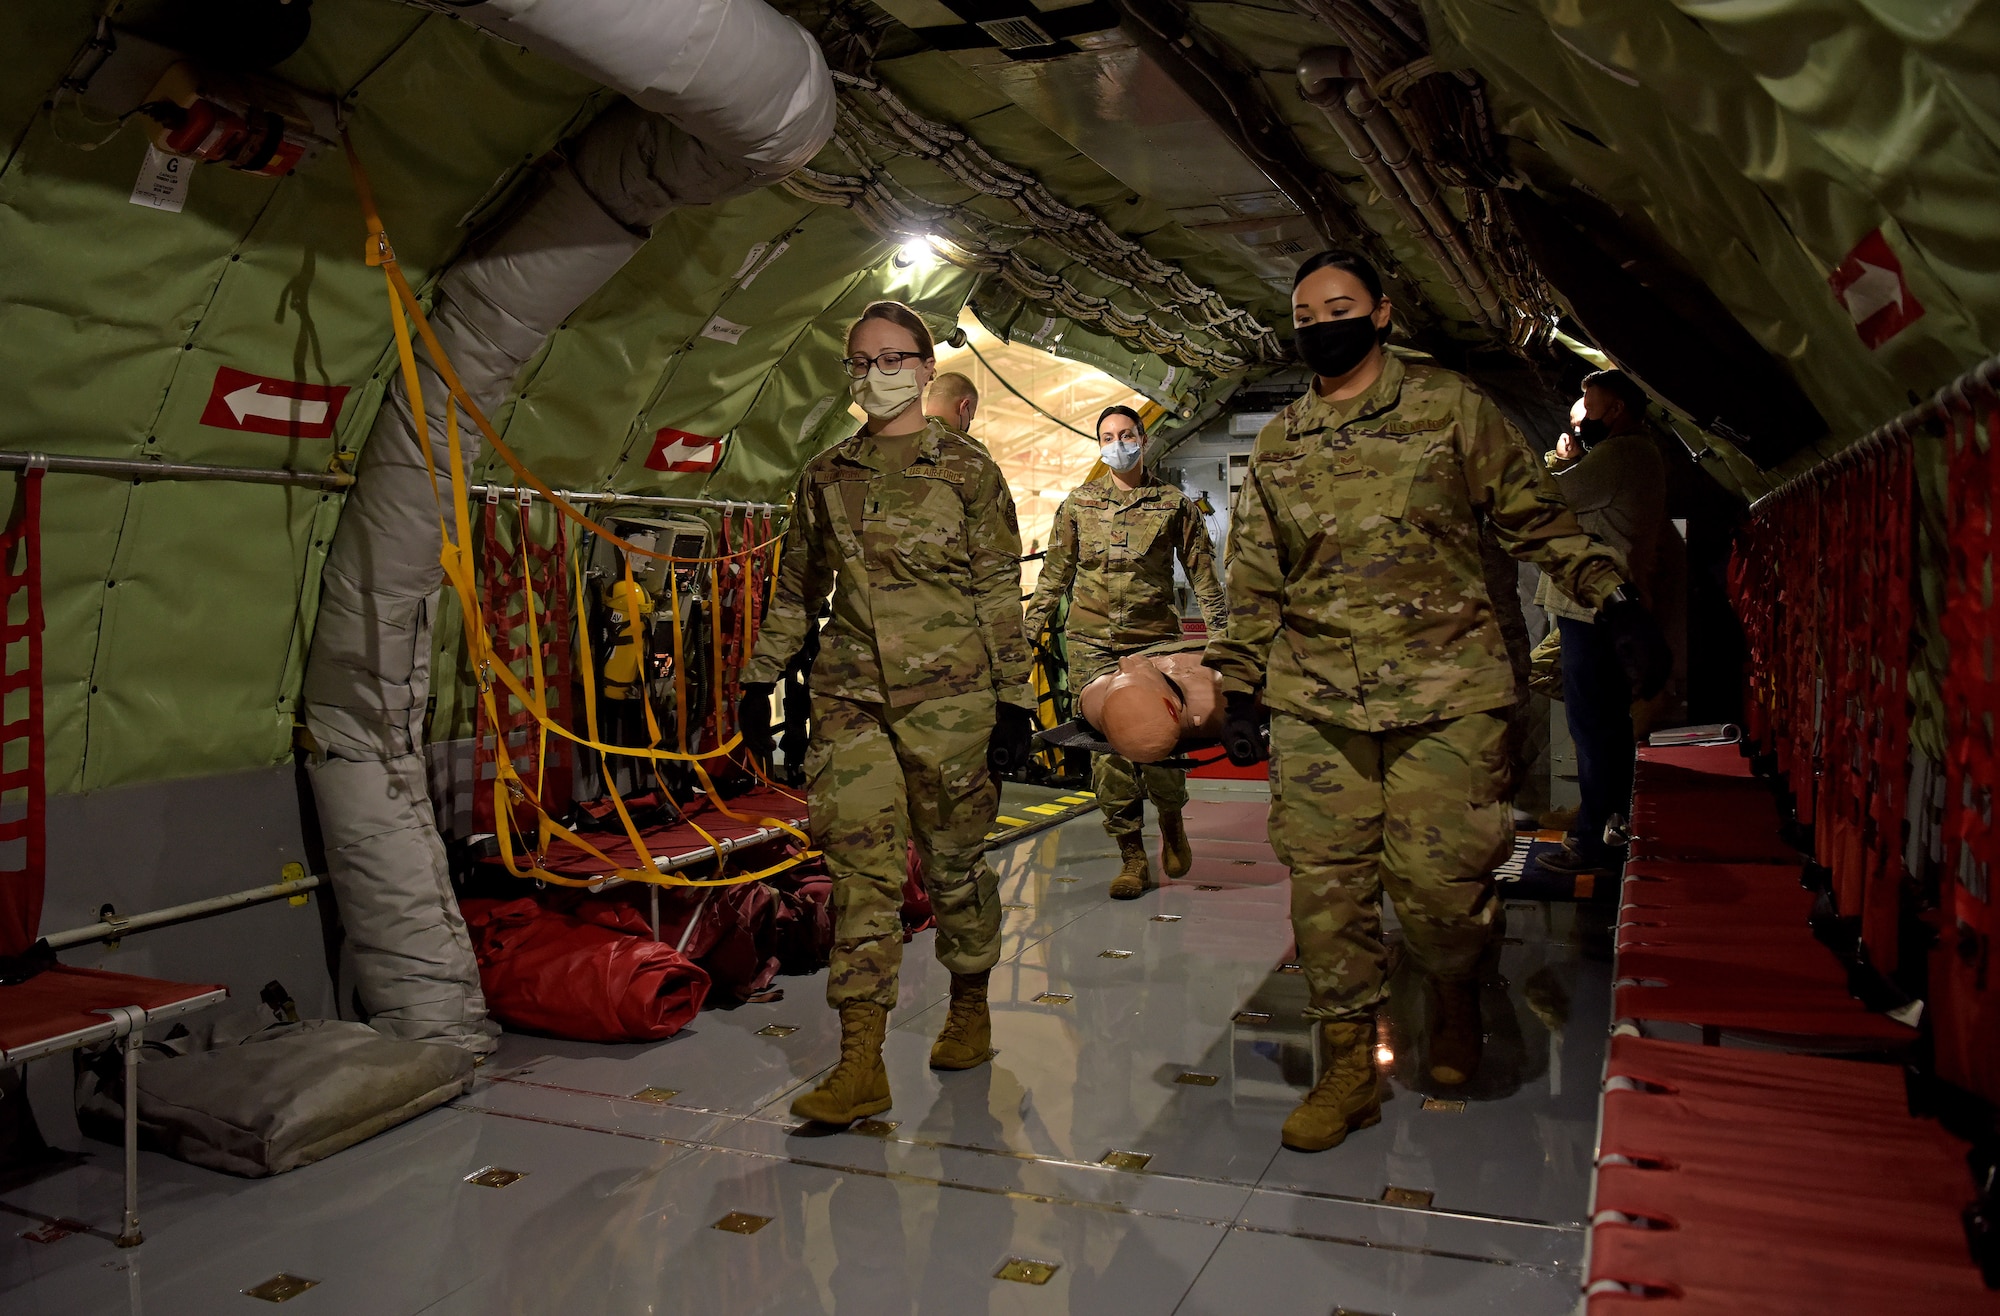 Medical technicians from the 375th Medical Group transport litters up a newly constructed Patient Loading System and onto a KC-135 Stratotanker at Scott Air Force Base, Illinois, Jan. 26, 2021. The PLS is a portable and constructable ramp used to safely on- and off-load patients to high-deck aircraft, such as the KC-10 Extender, KC-46 Pegasus and KC-135 Stratotanker. (U.S. Air Force photo by Master Sgt. R.J. Biermann)